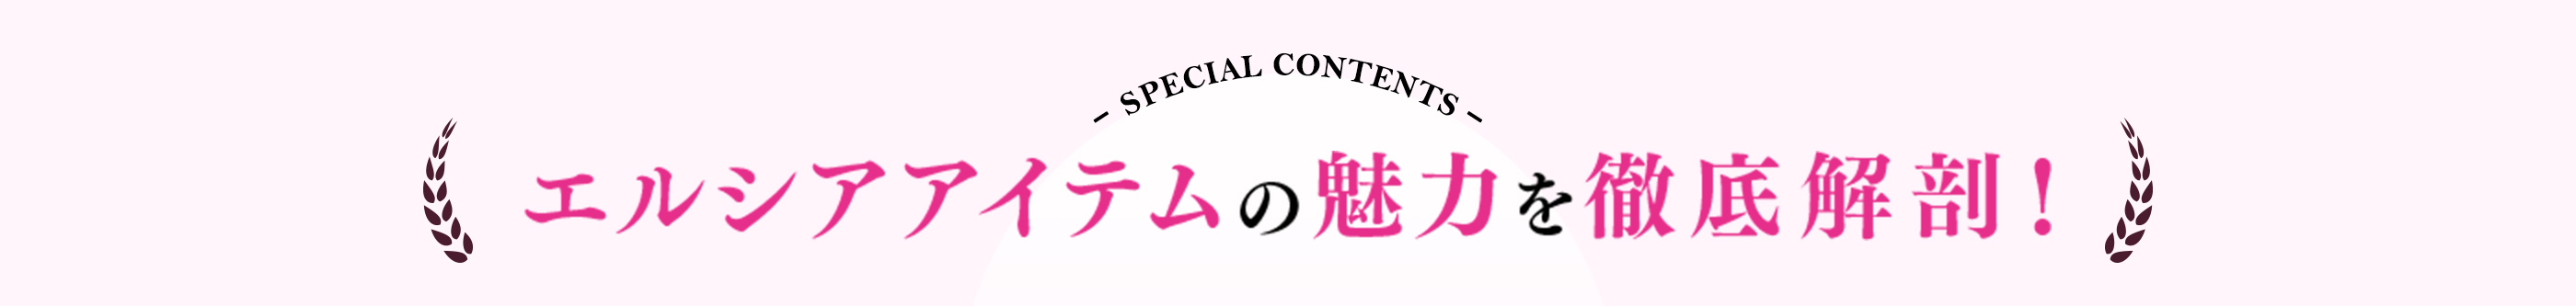 SPECIAL CONTENTS エルシアアイテムの魅力を徹底解剖！